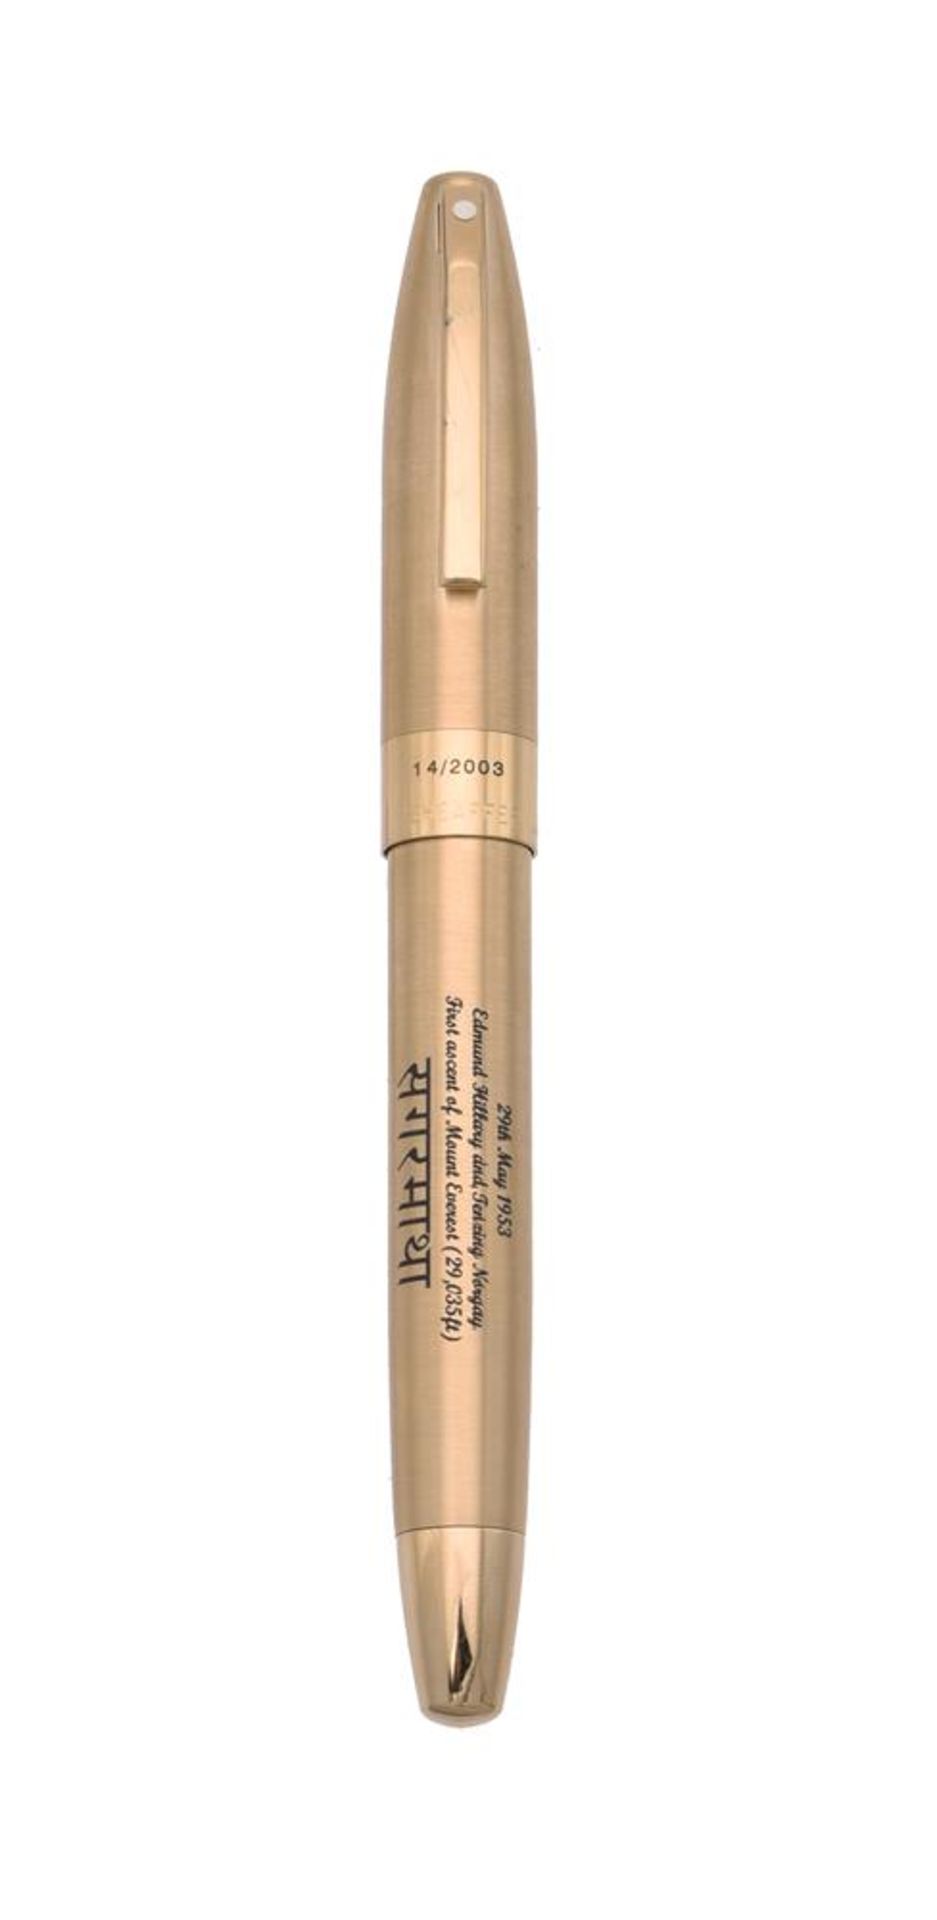 SHEAFFER, MOUNT EVEREST 1953 - 2003, LIMITED EDITION GOLD PLATED FOUNTAIN PEN